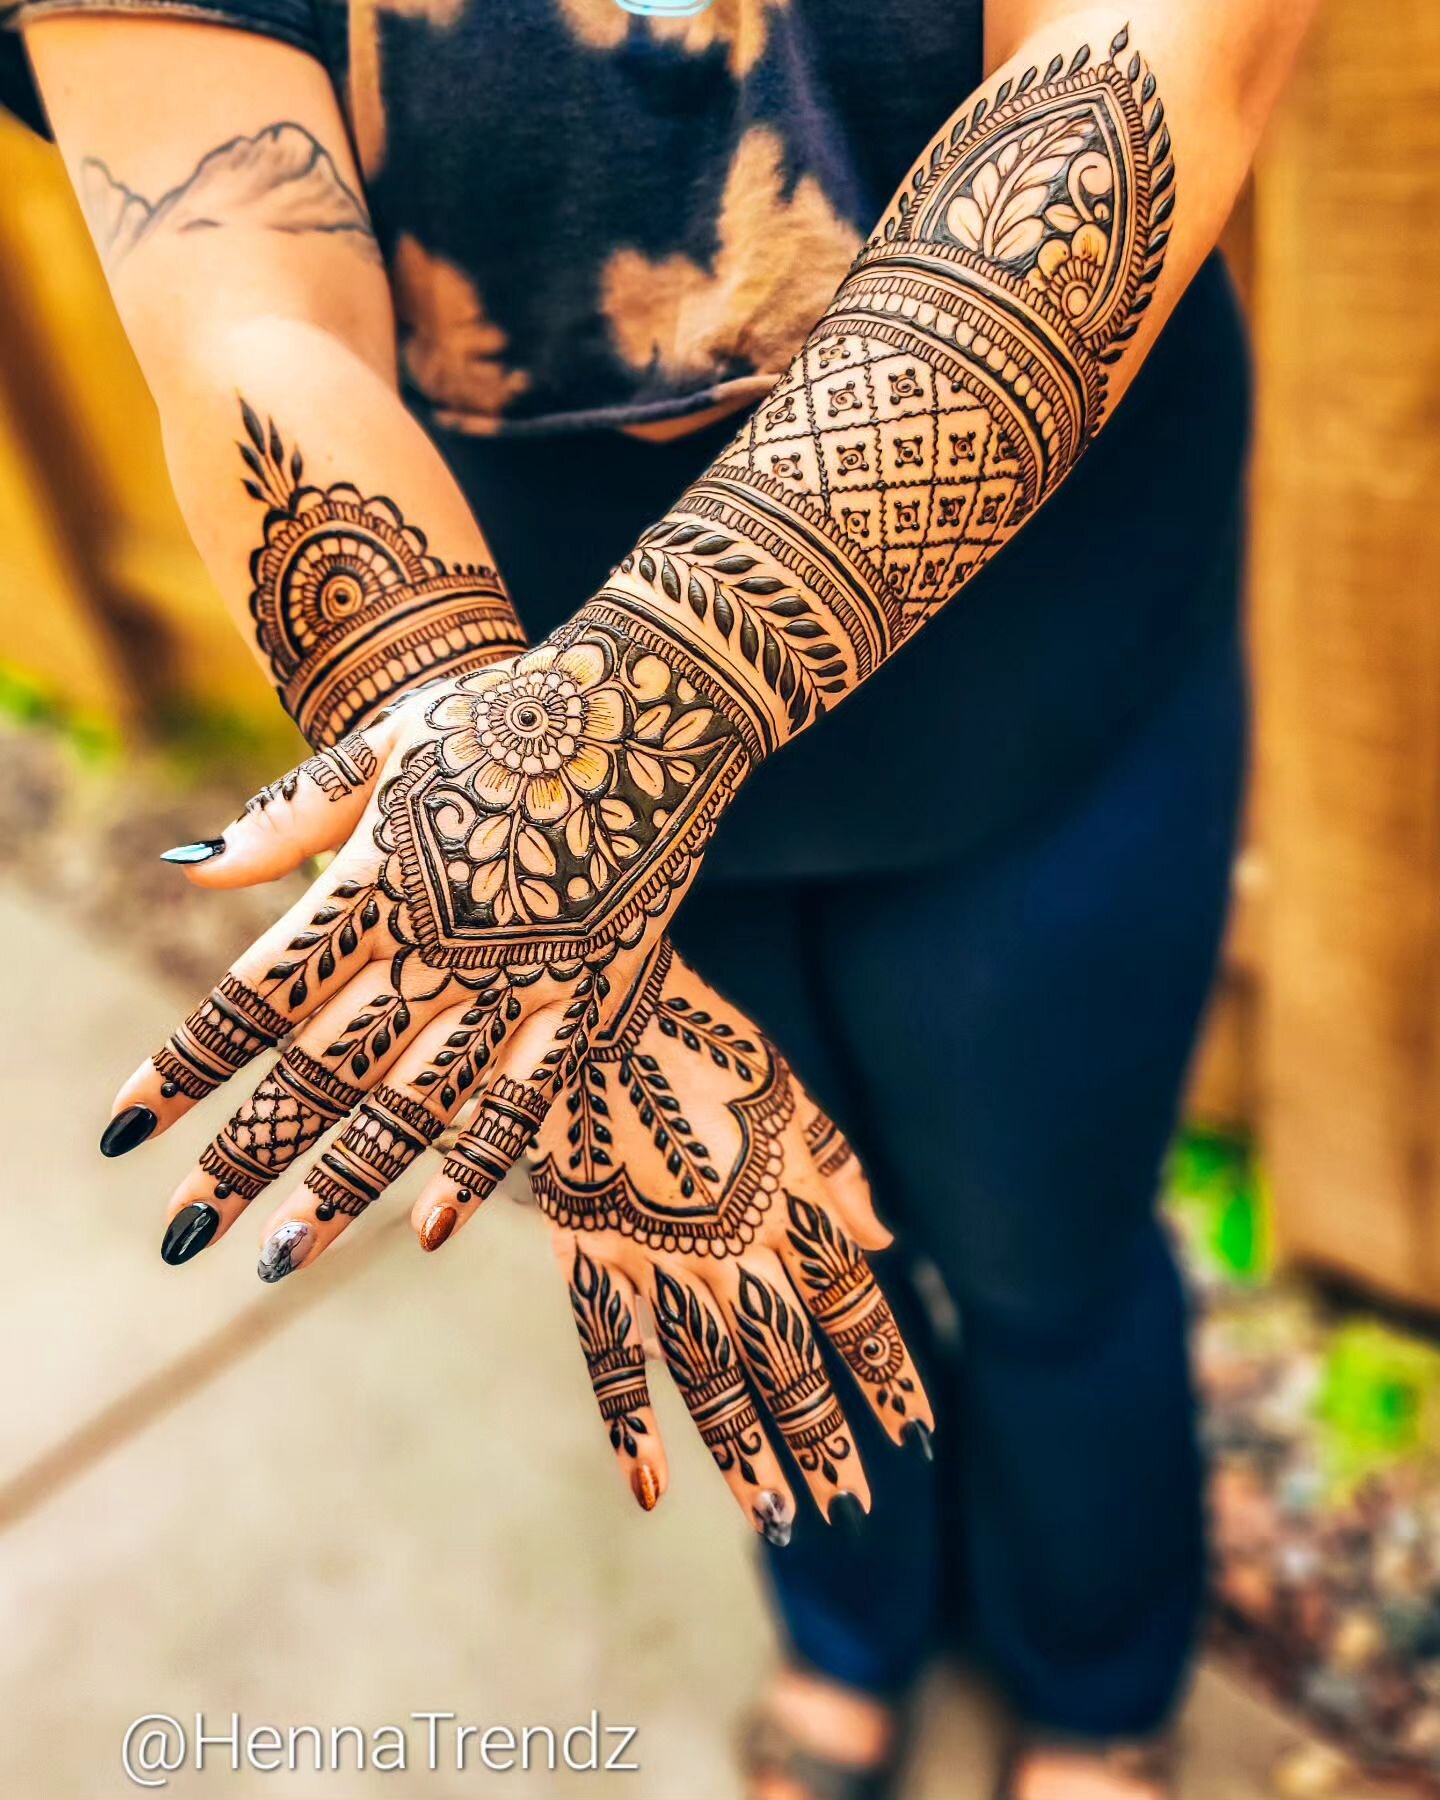 Graduation ready!❤️❤️🥰✔️👩&zwj;🎓👩&zwj;🎓
#sdsu 

FOLLOW @hennatrendz
YOUTUBE: HennaTrendz

💖💖Weekends are the best time to place your orders for fresh henna cones... I mix fresh batches every weekend to ship out on Monday!! visit link in bio and